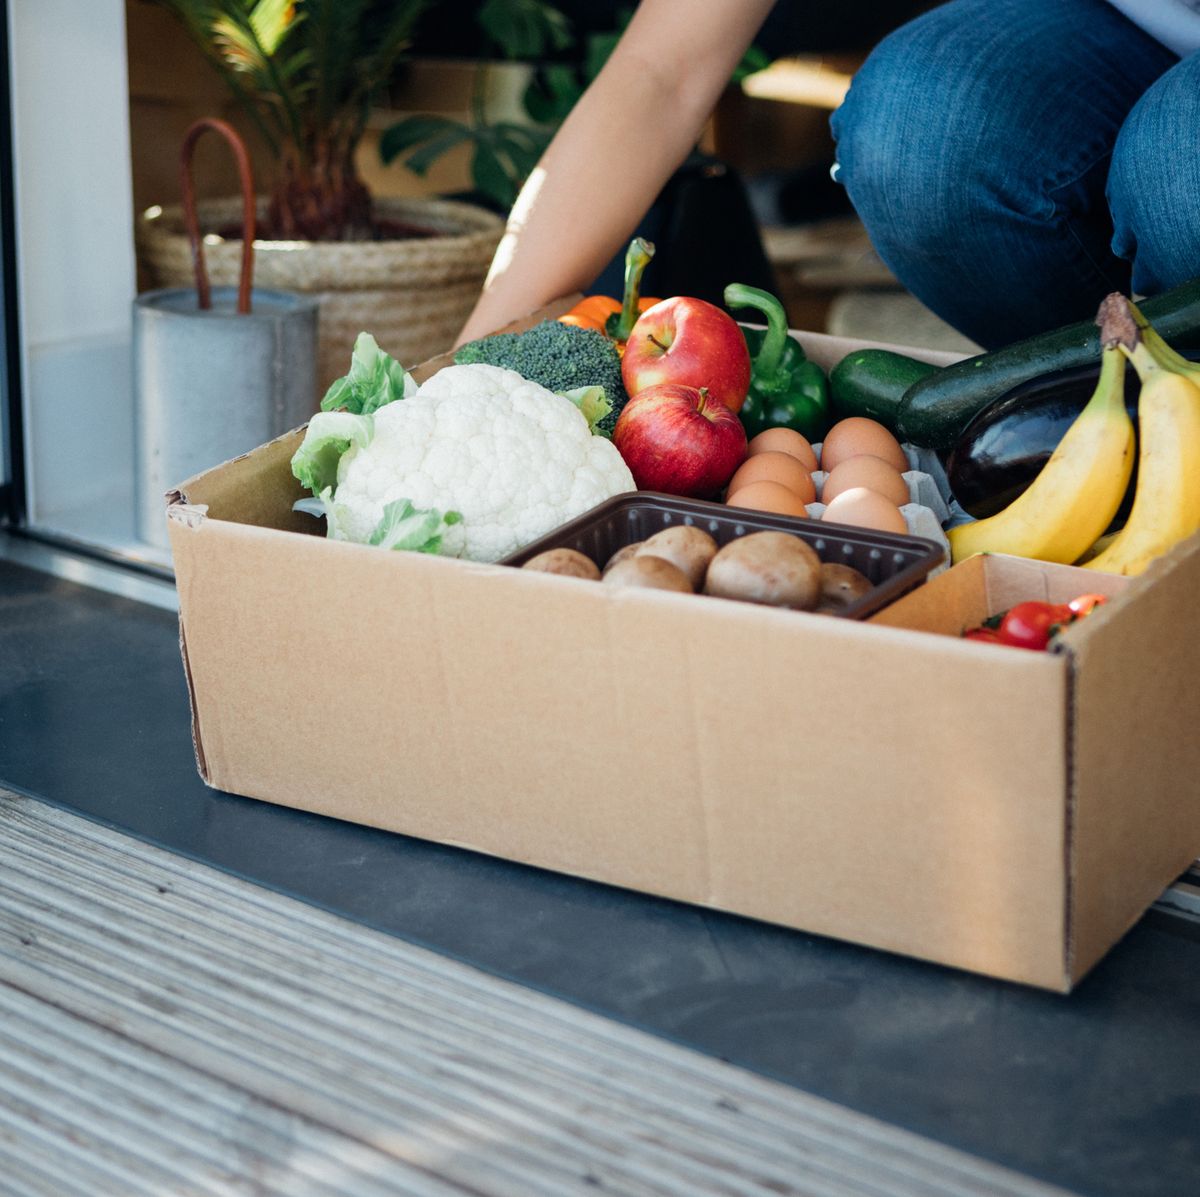 Fresh offers grocery delivery to customers who are not Prime members